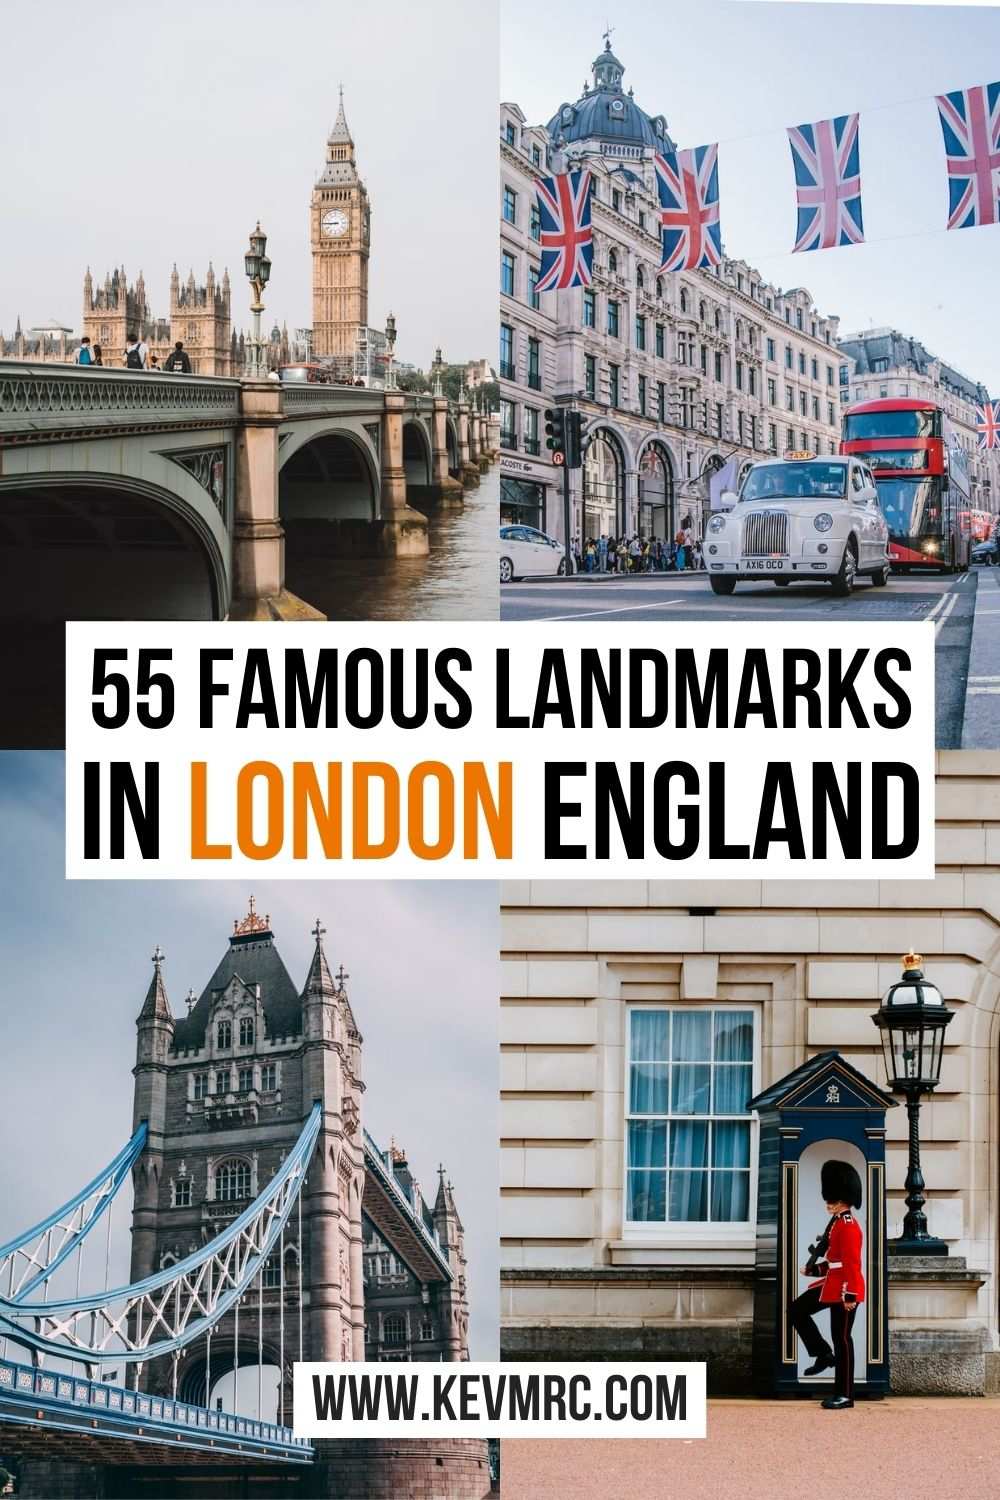 Ranked in the top 5 most visited cities in the world for years, the capital of England and the UK is one of the largest European cities. Dynamic, vibrant and modern, London is endowed with an exceptional historical and cultural heritage that will delight all tourists. Here’s the list of the 55 most famous landmarks in London! #london #england #uk